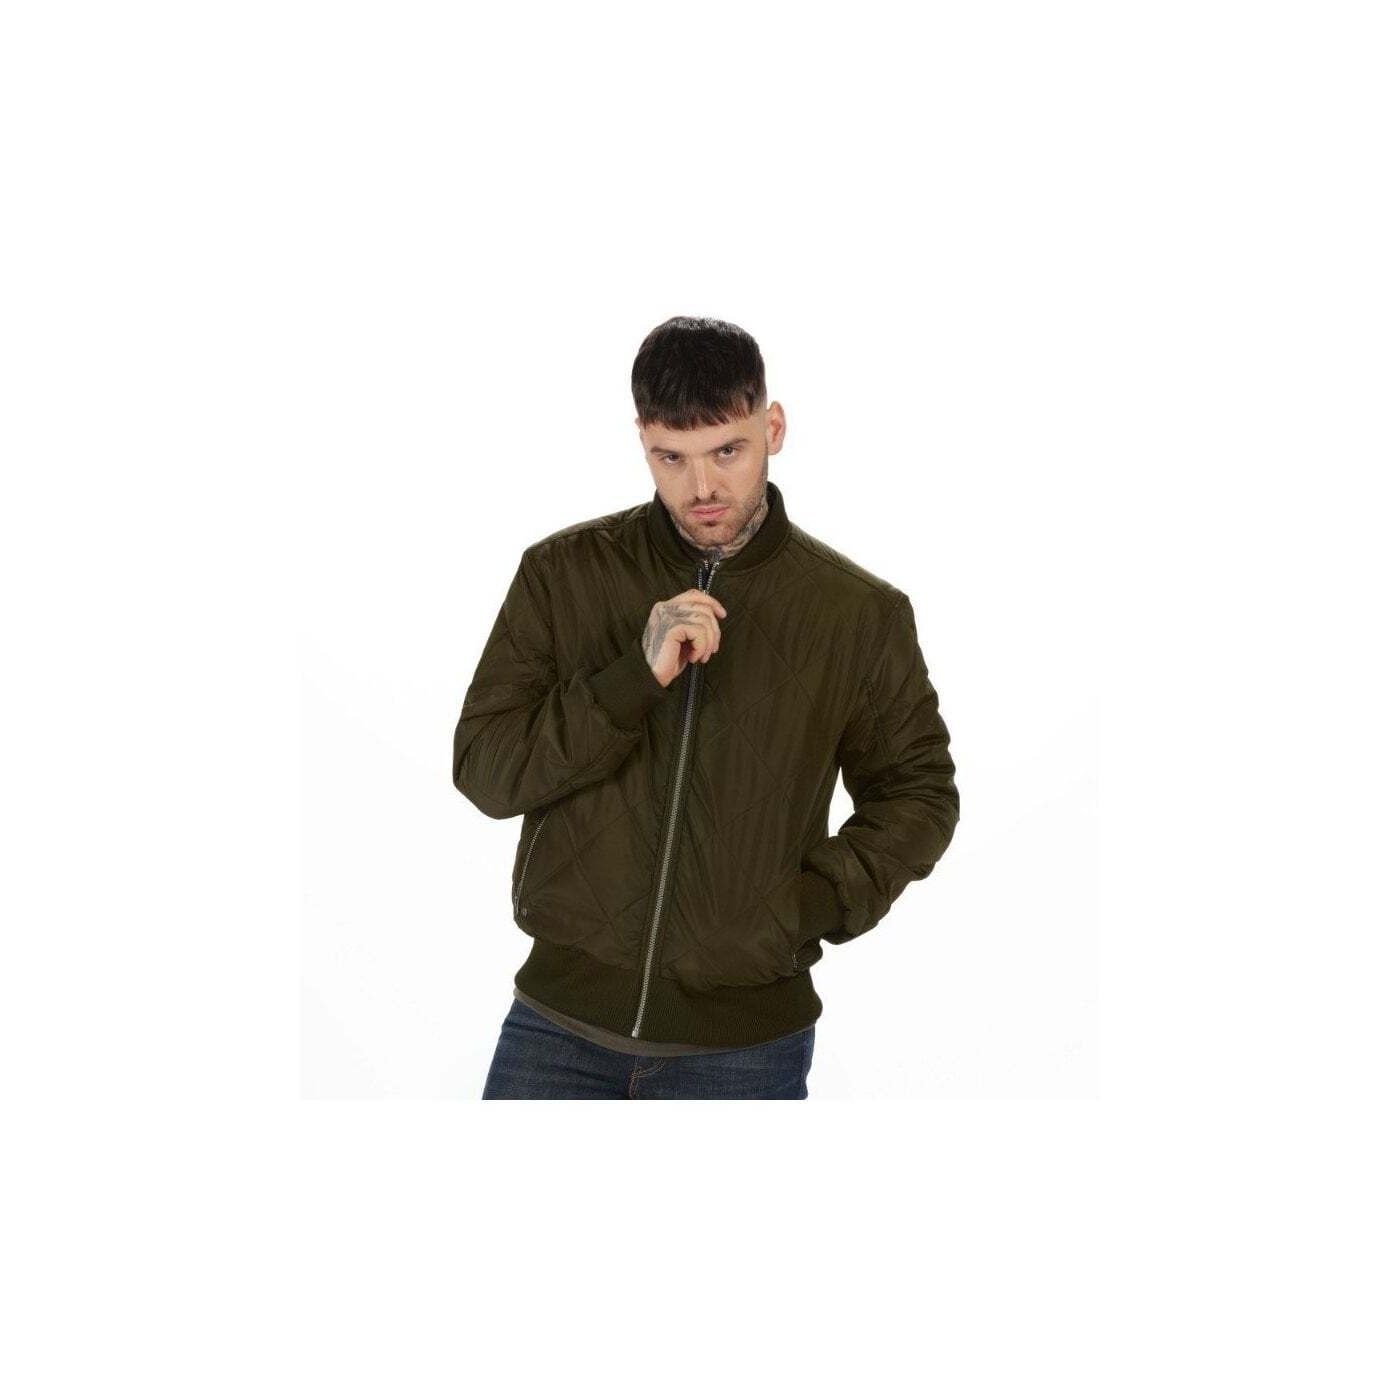 100% Polyester. Lightweight diamond quilted jacket. Sleek and durable. Water repellent finish with quality thermo-guard 140GSM insulation. The stretch rib at collar, hem & cuffs allow for comfortable movement. With 2  lower pockets.